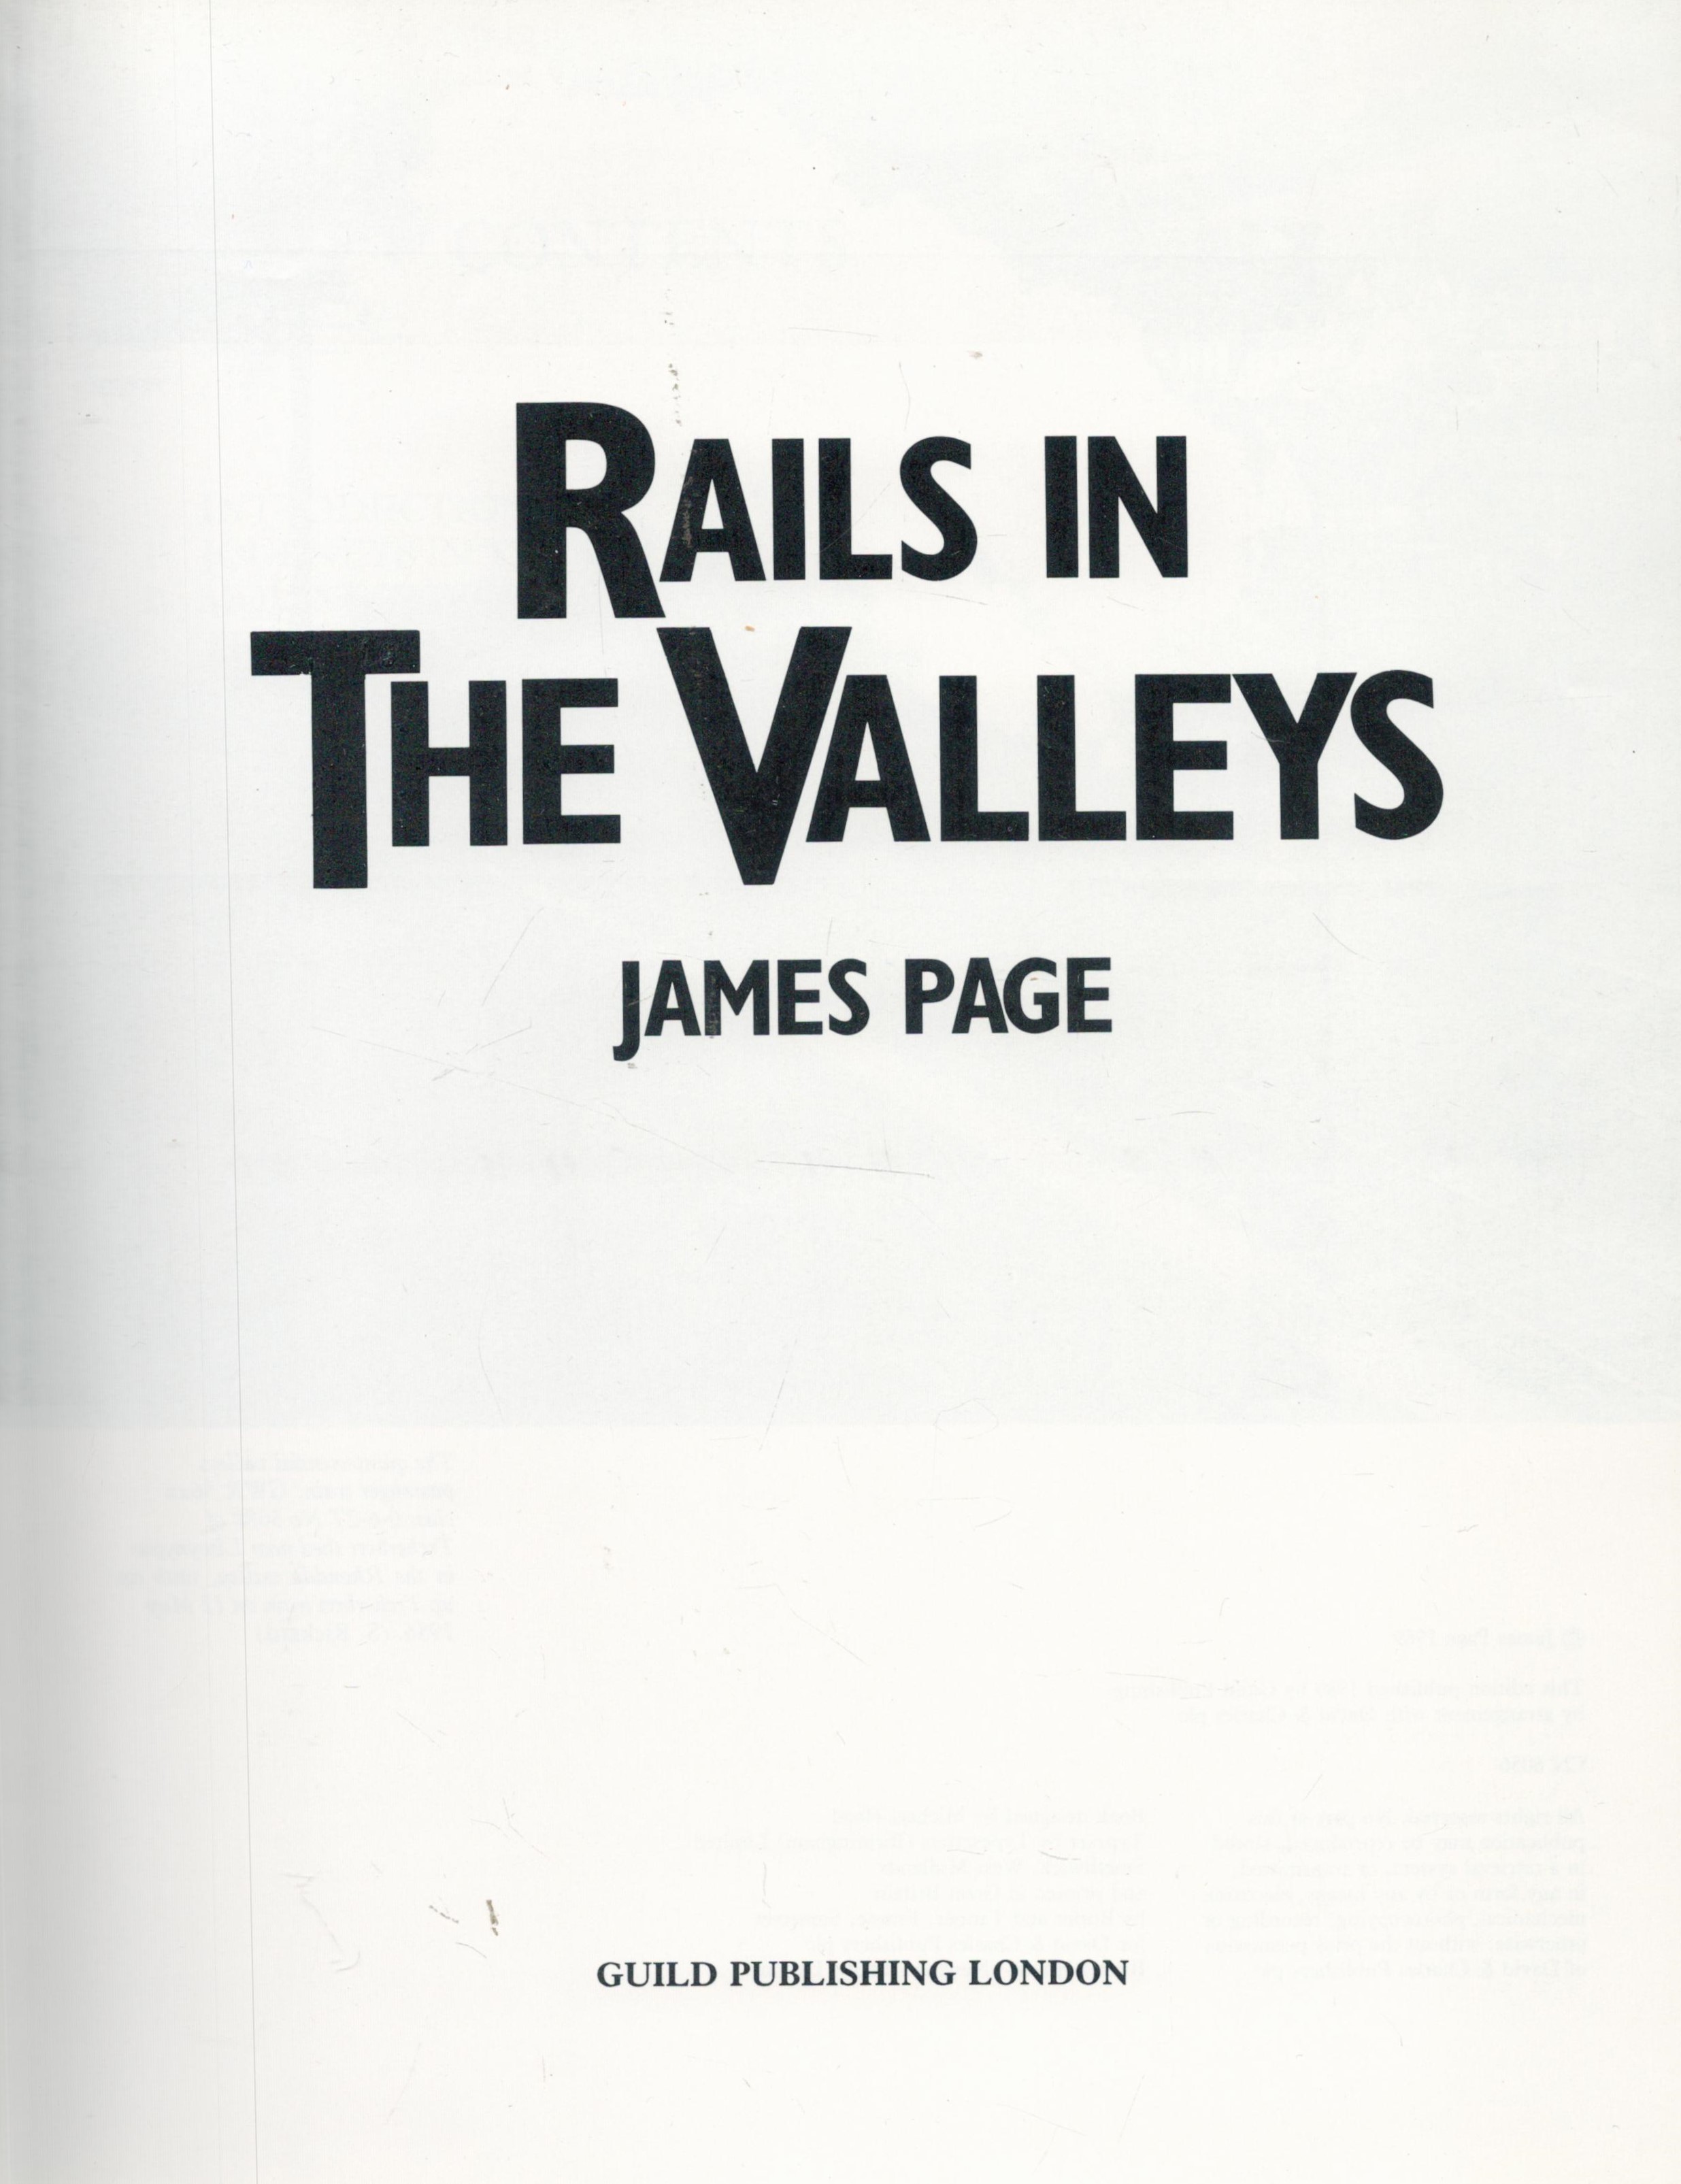 Rails in The Valleys by James Page 1989 edition unknown Hardback Book with 192 pages published by - Image 2 of 3